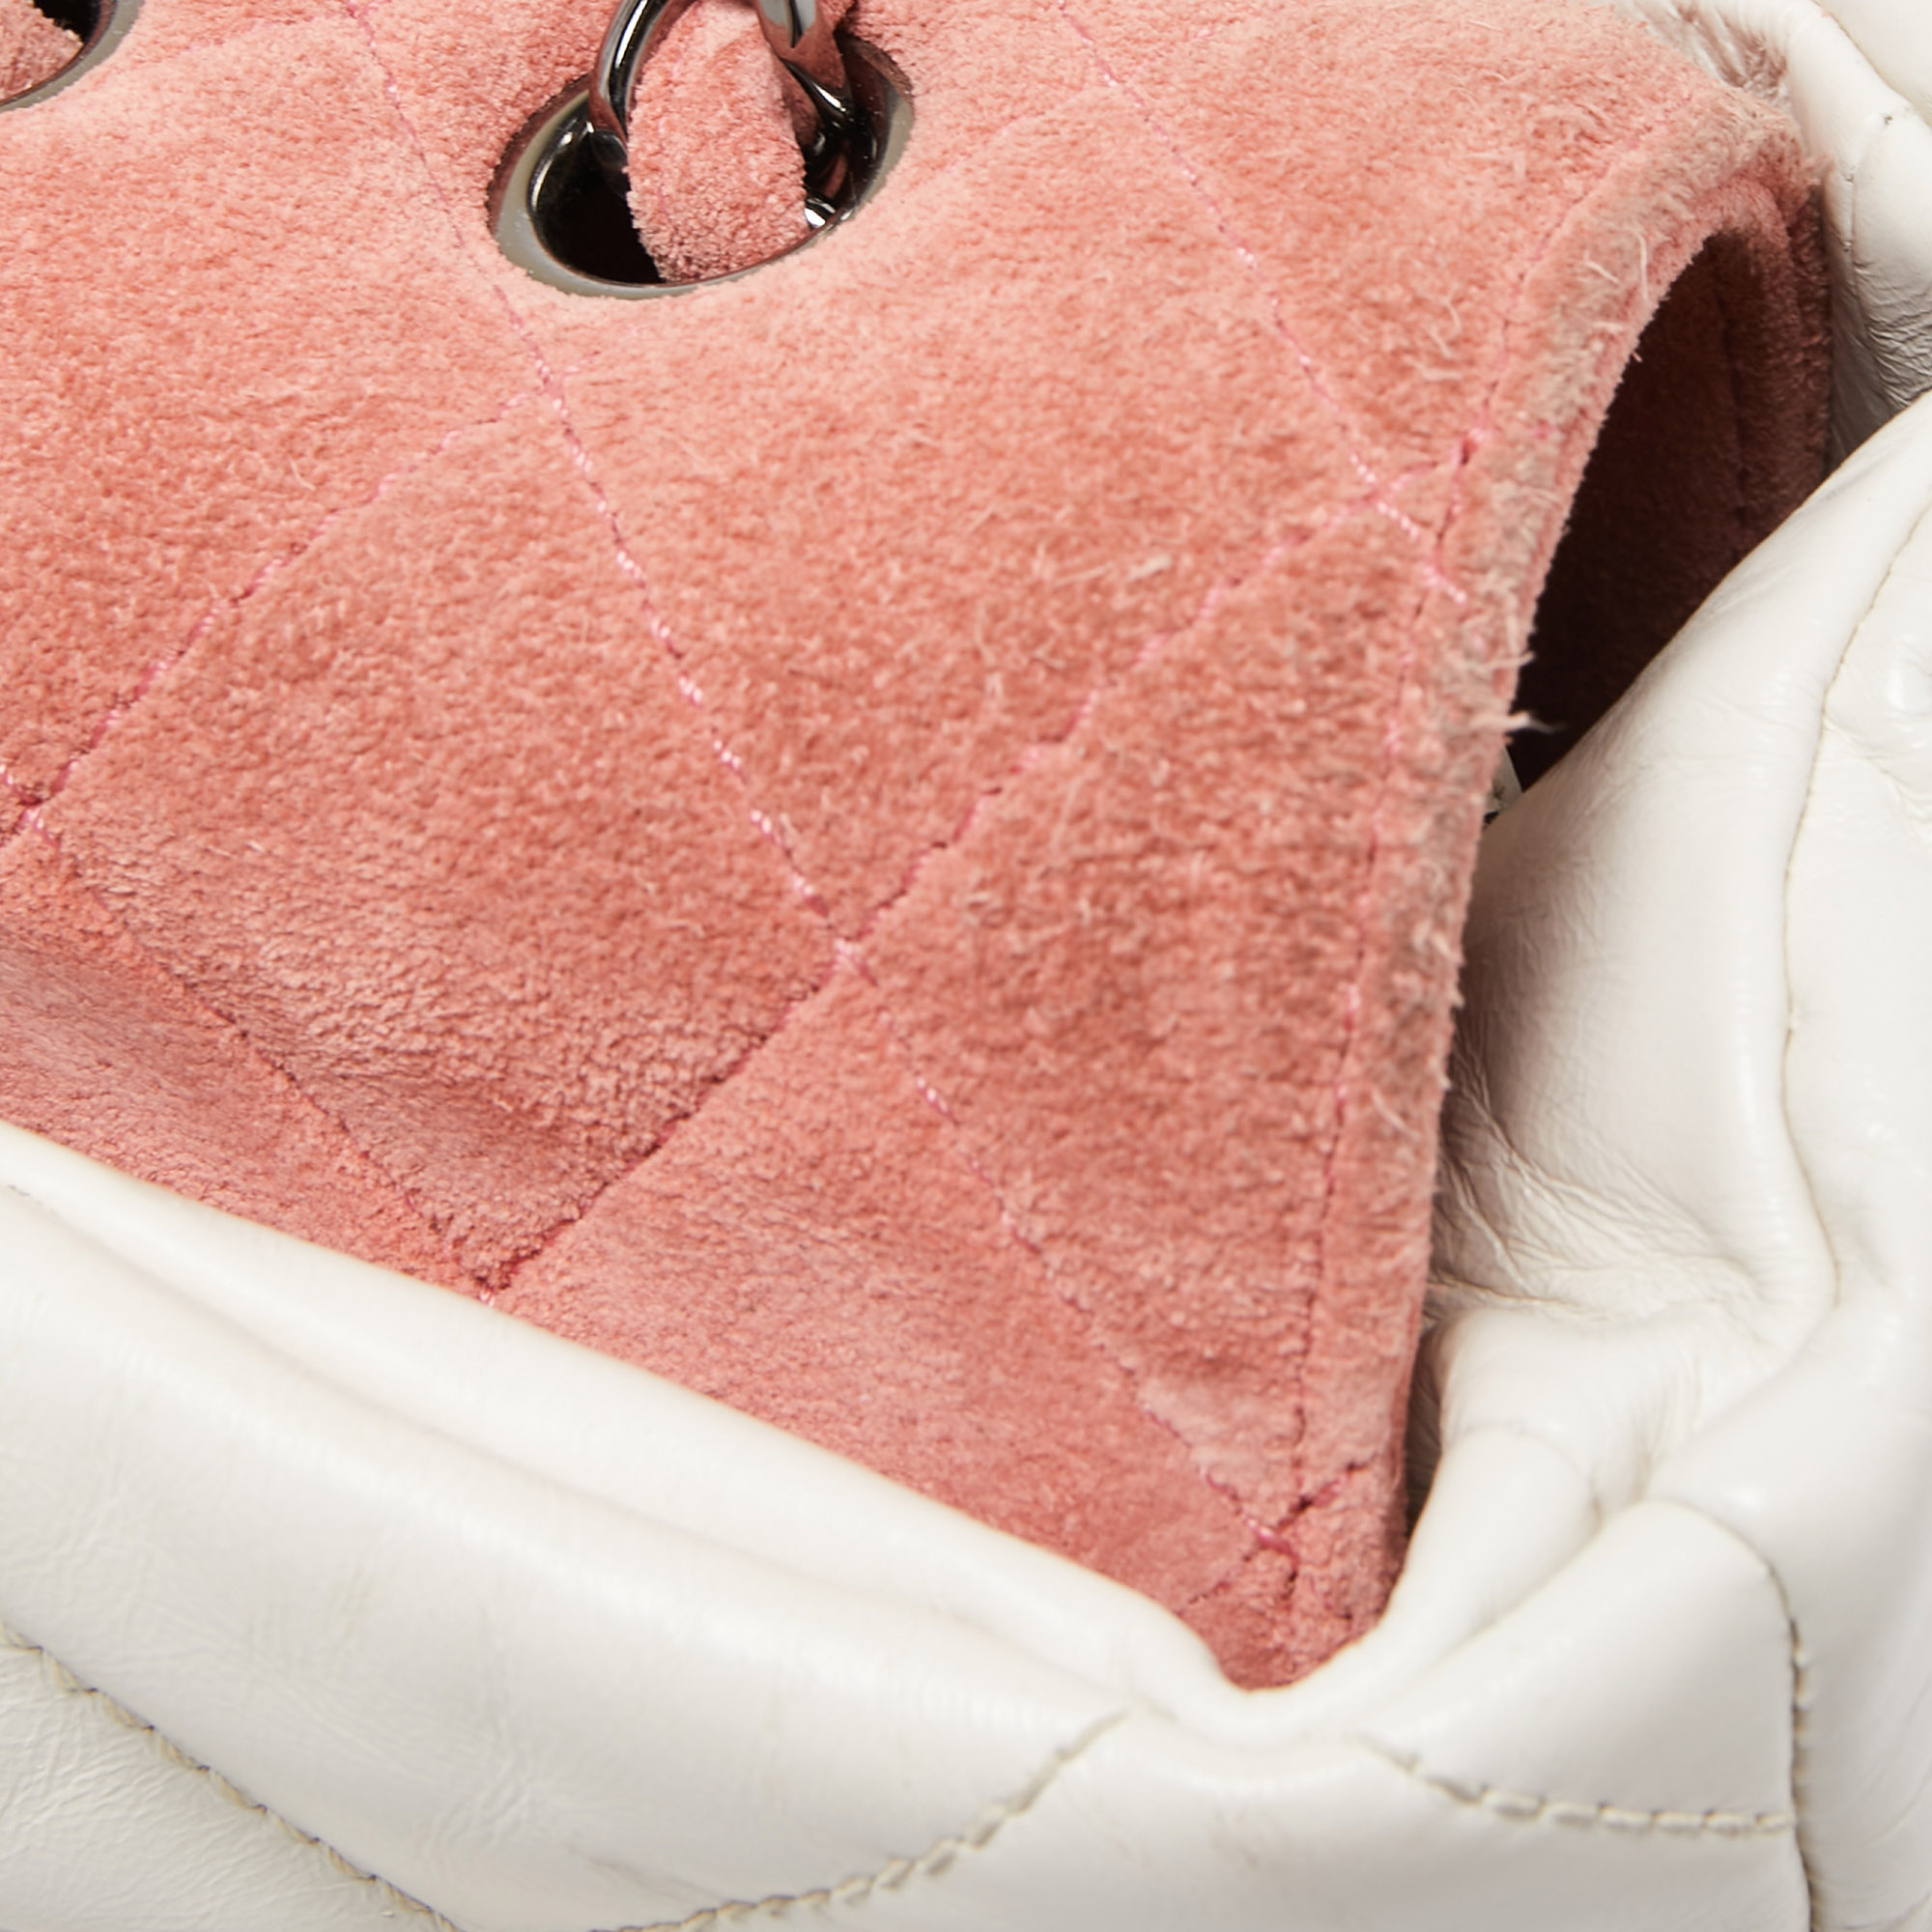 Chanel White/Pink Quilted Leather And Suede Portobello Tote